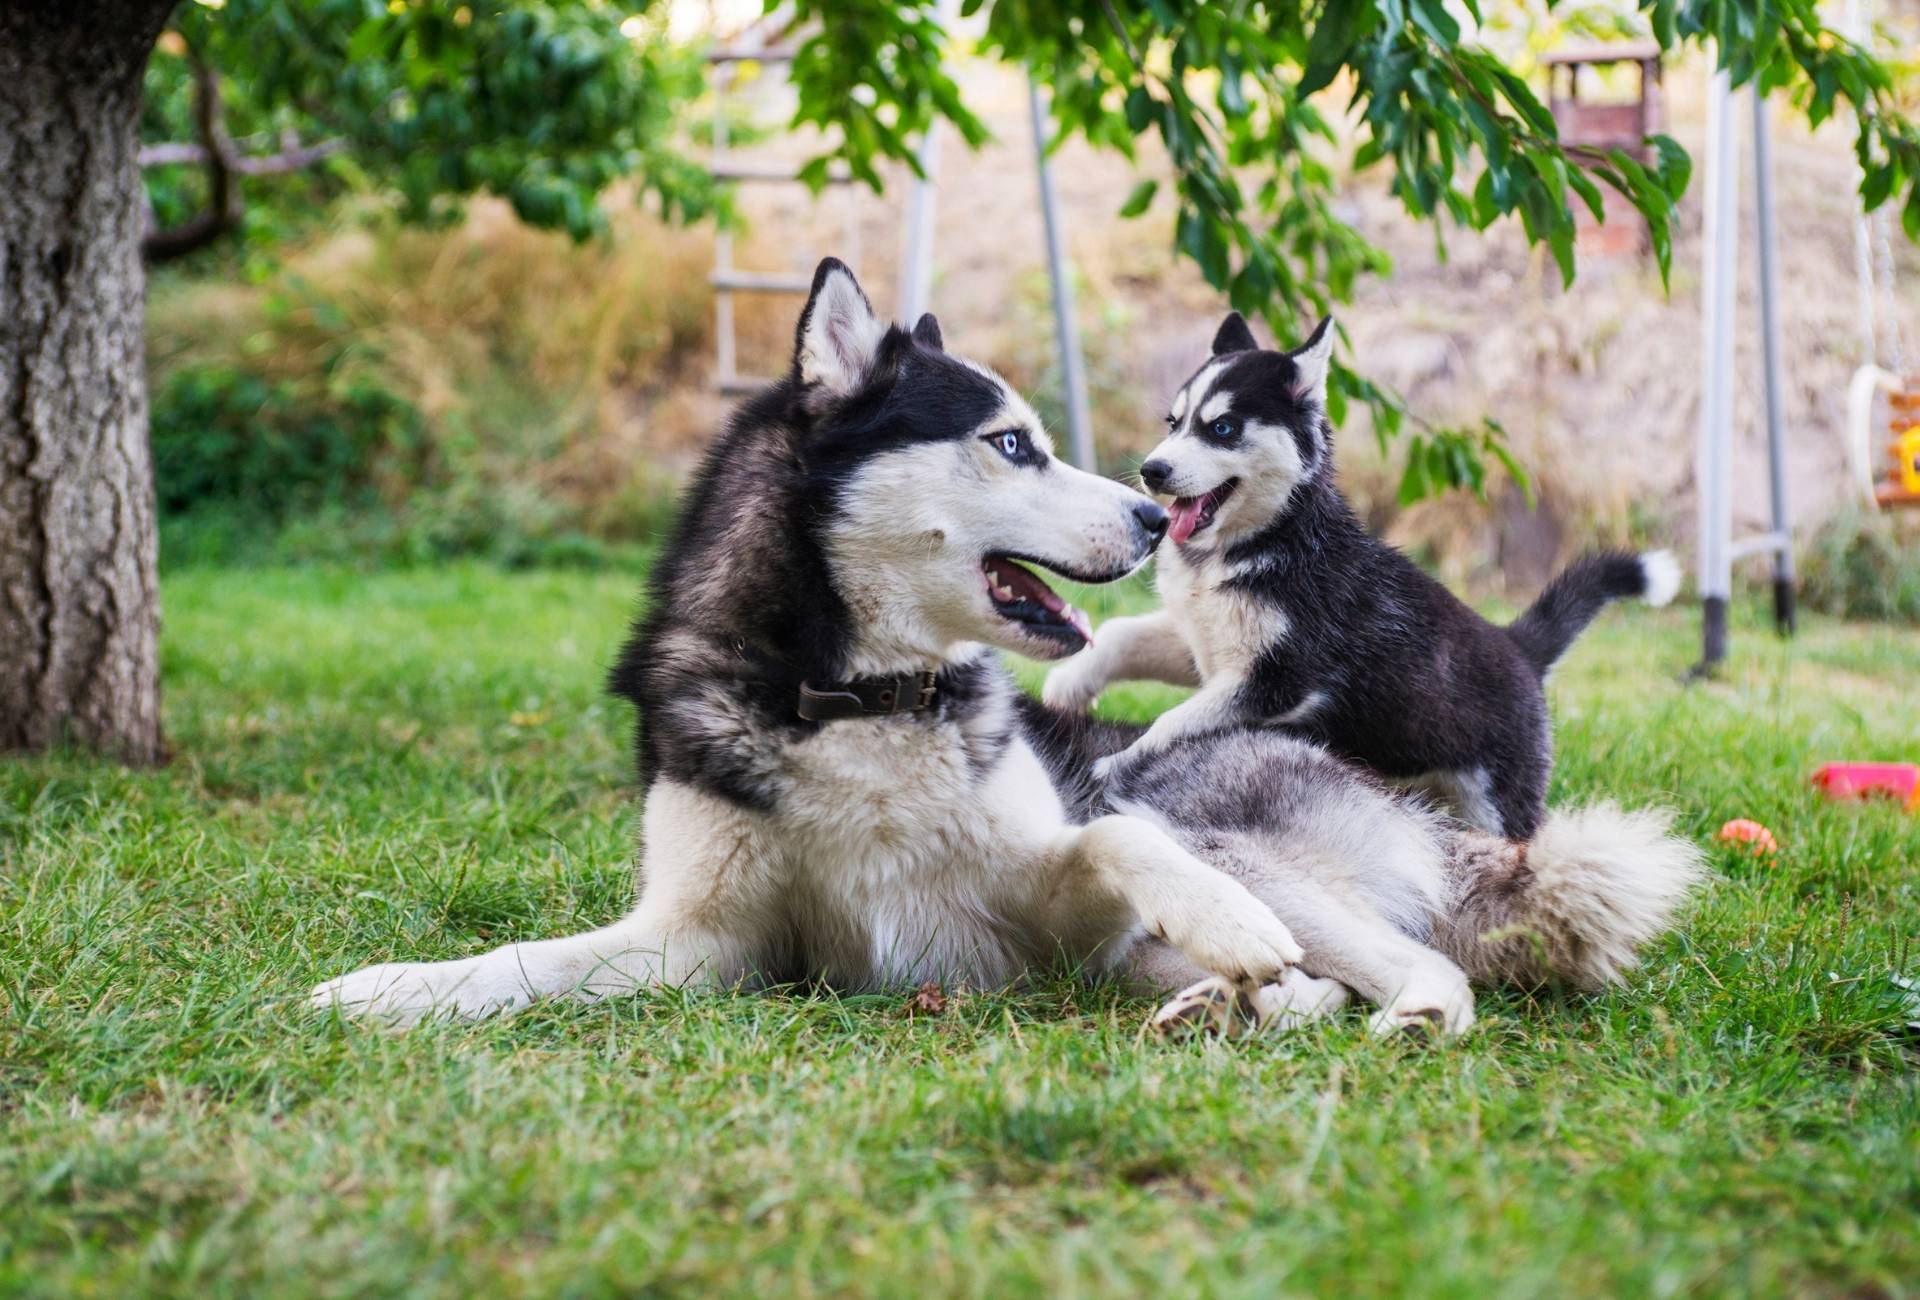 A Husky puppy stalks an older Husky to communicate with its face.